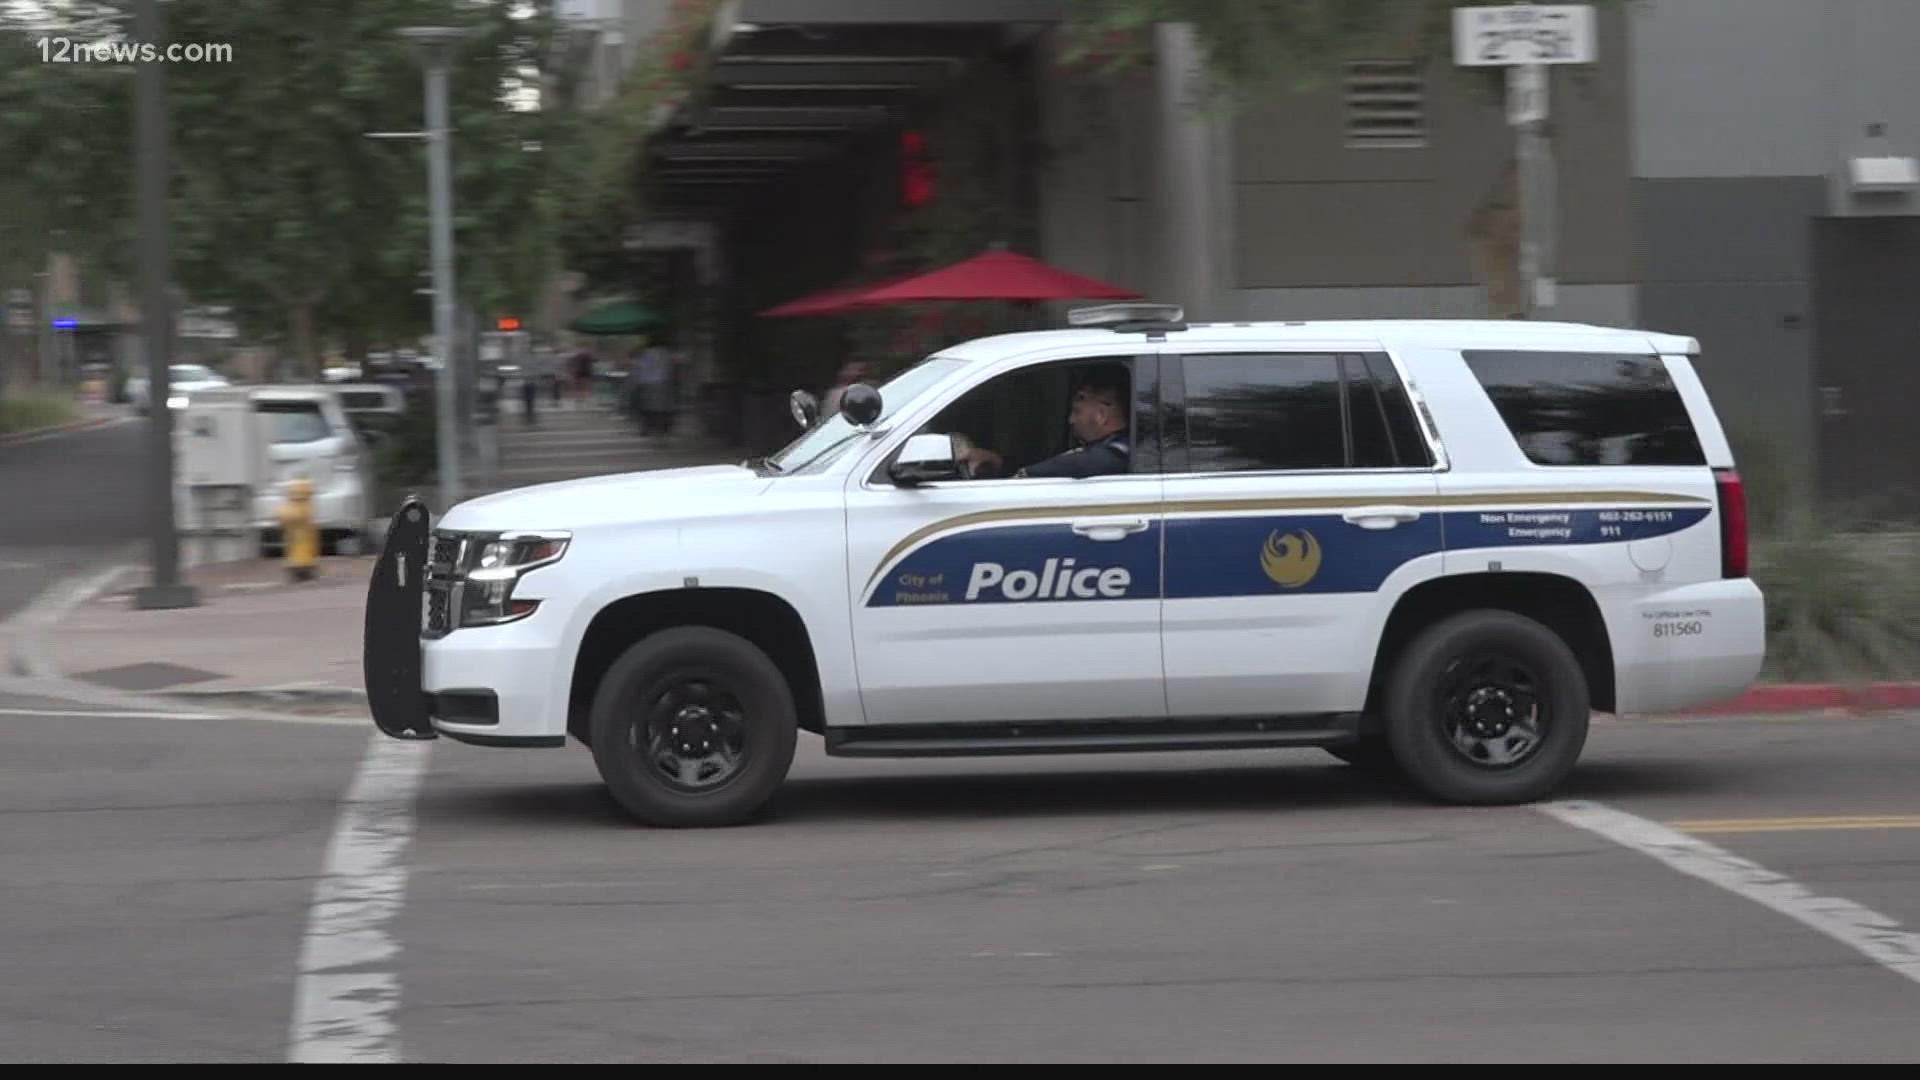 A new poll finds that nearly 1 in 5 drivers in Arizona say they would try and bribe the officer to get out of the ticket if they could get away with it.